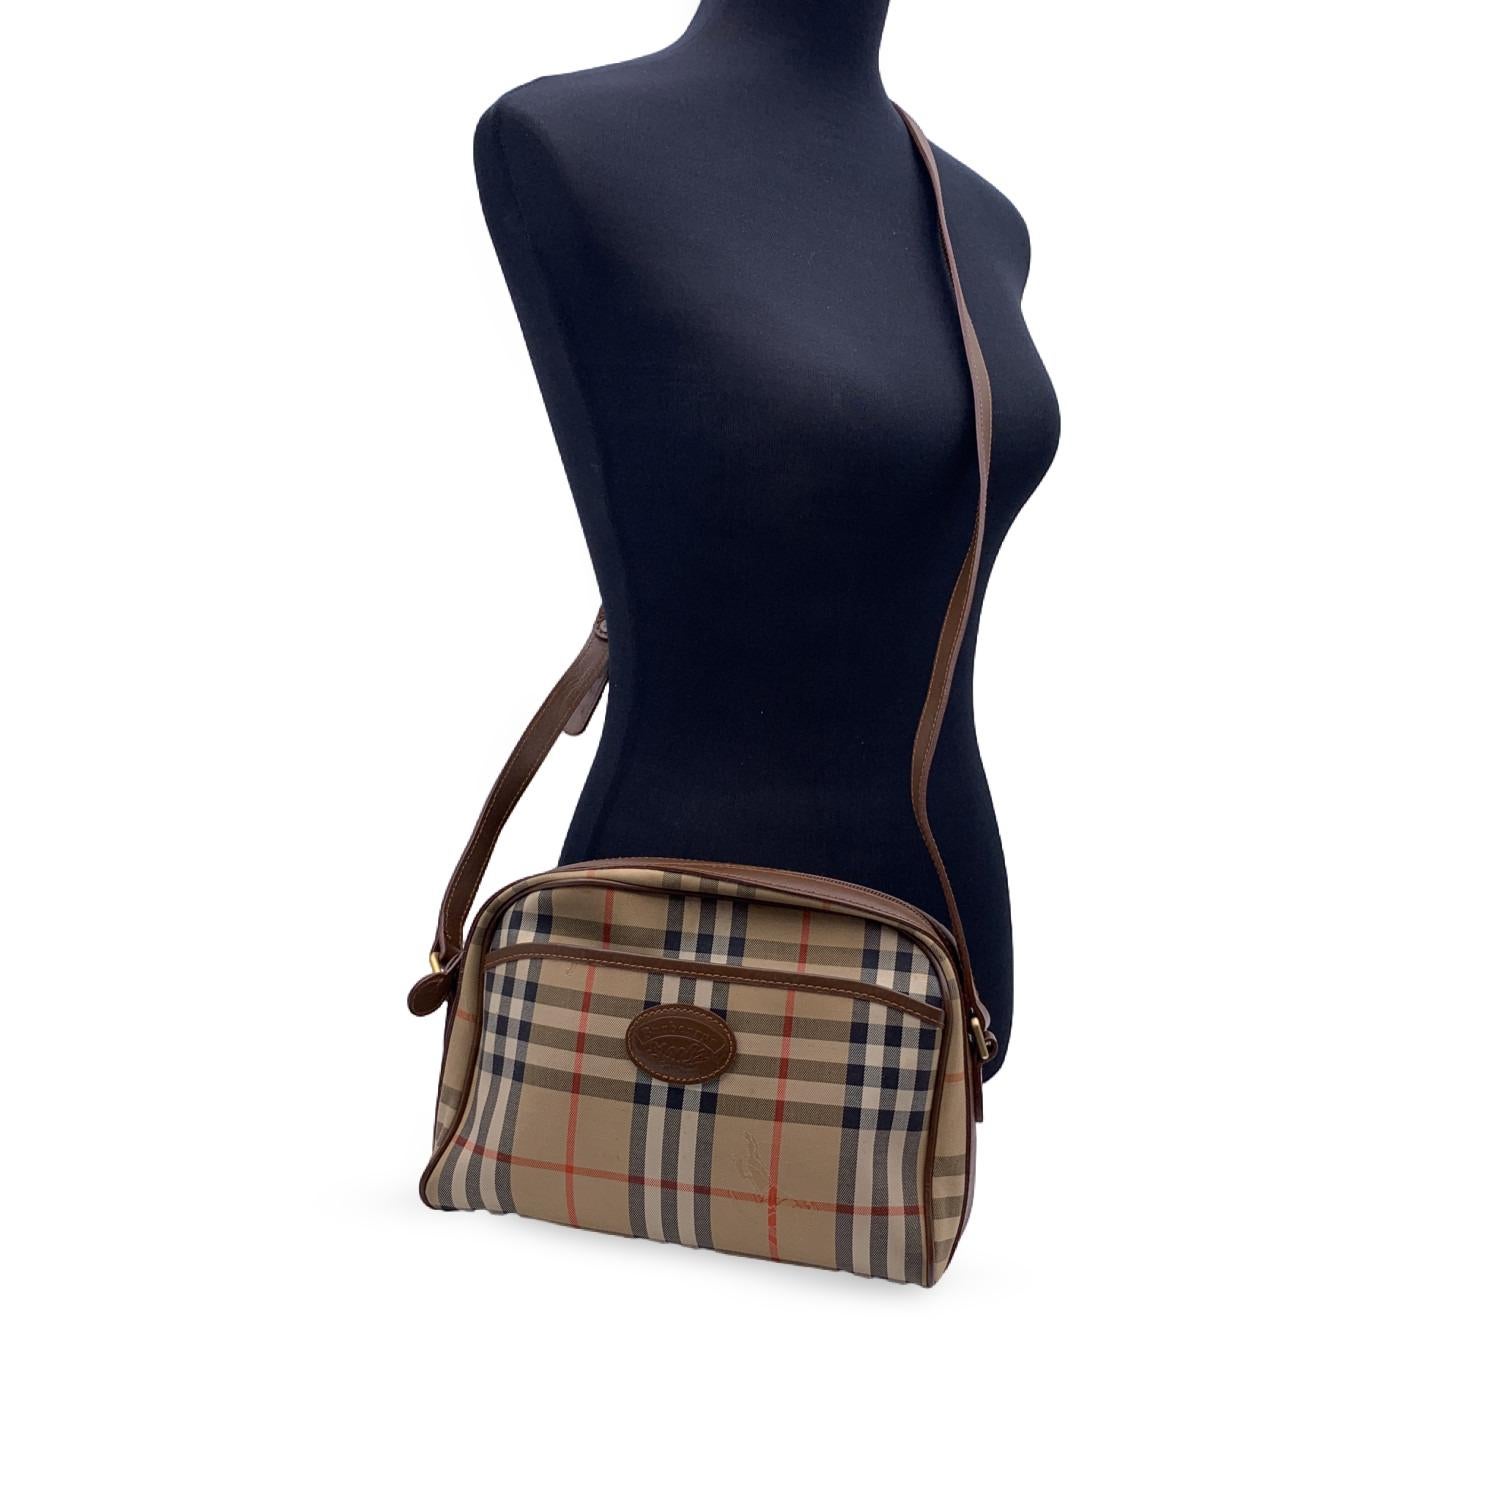 Burberry Crossbody Messenger in iconic nova check plaid canvas with brown leather trim. Front open pocket. Upper zip closure. Brown fabric lining. 1 side zip pocket inside. Adjustable strap.

Condition

B - VERY GOOD

Gently used. Minimal wear of